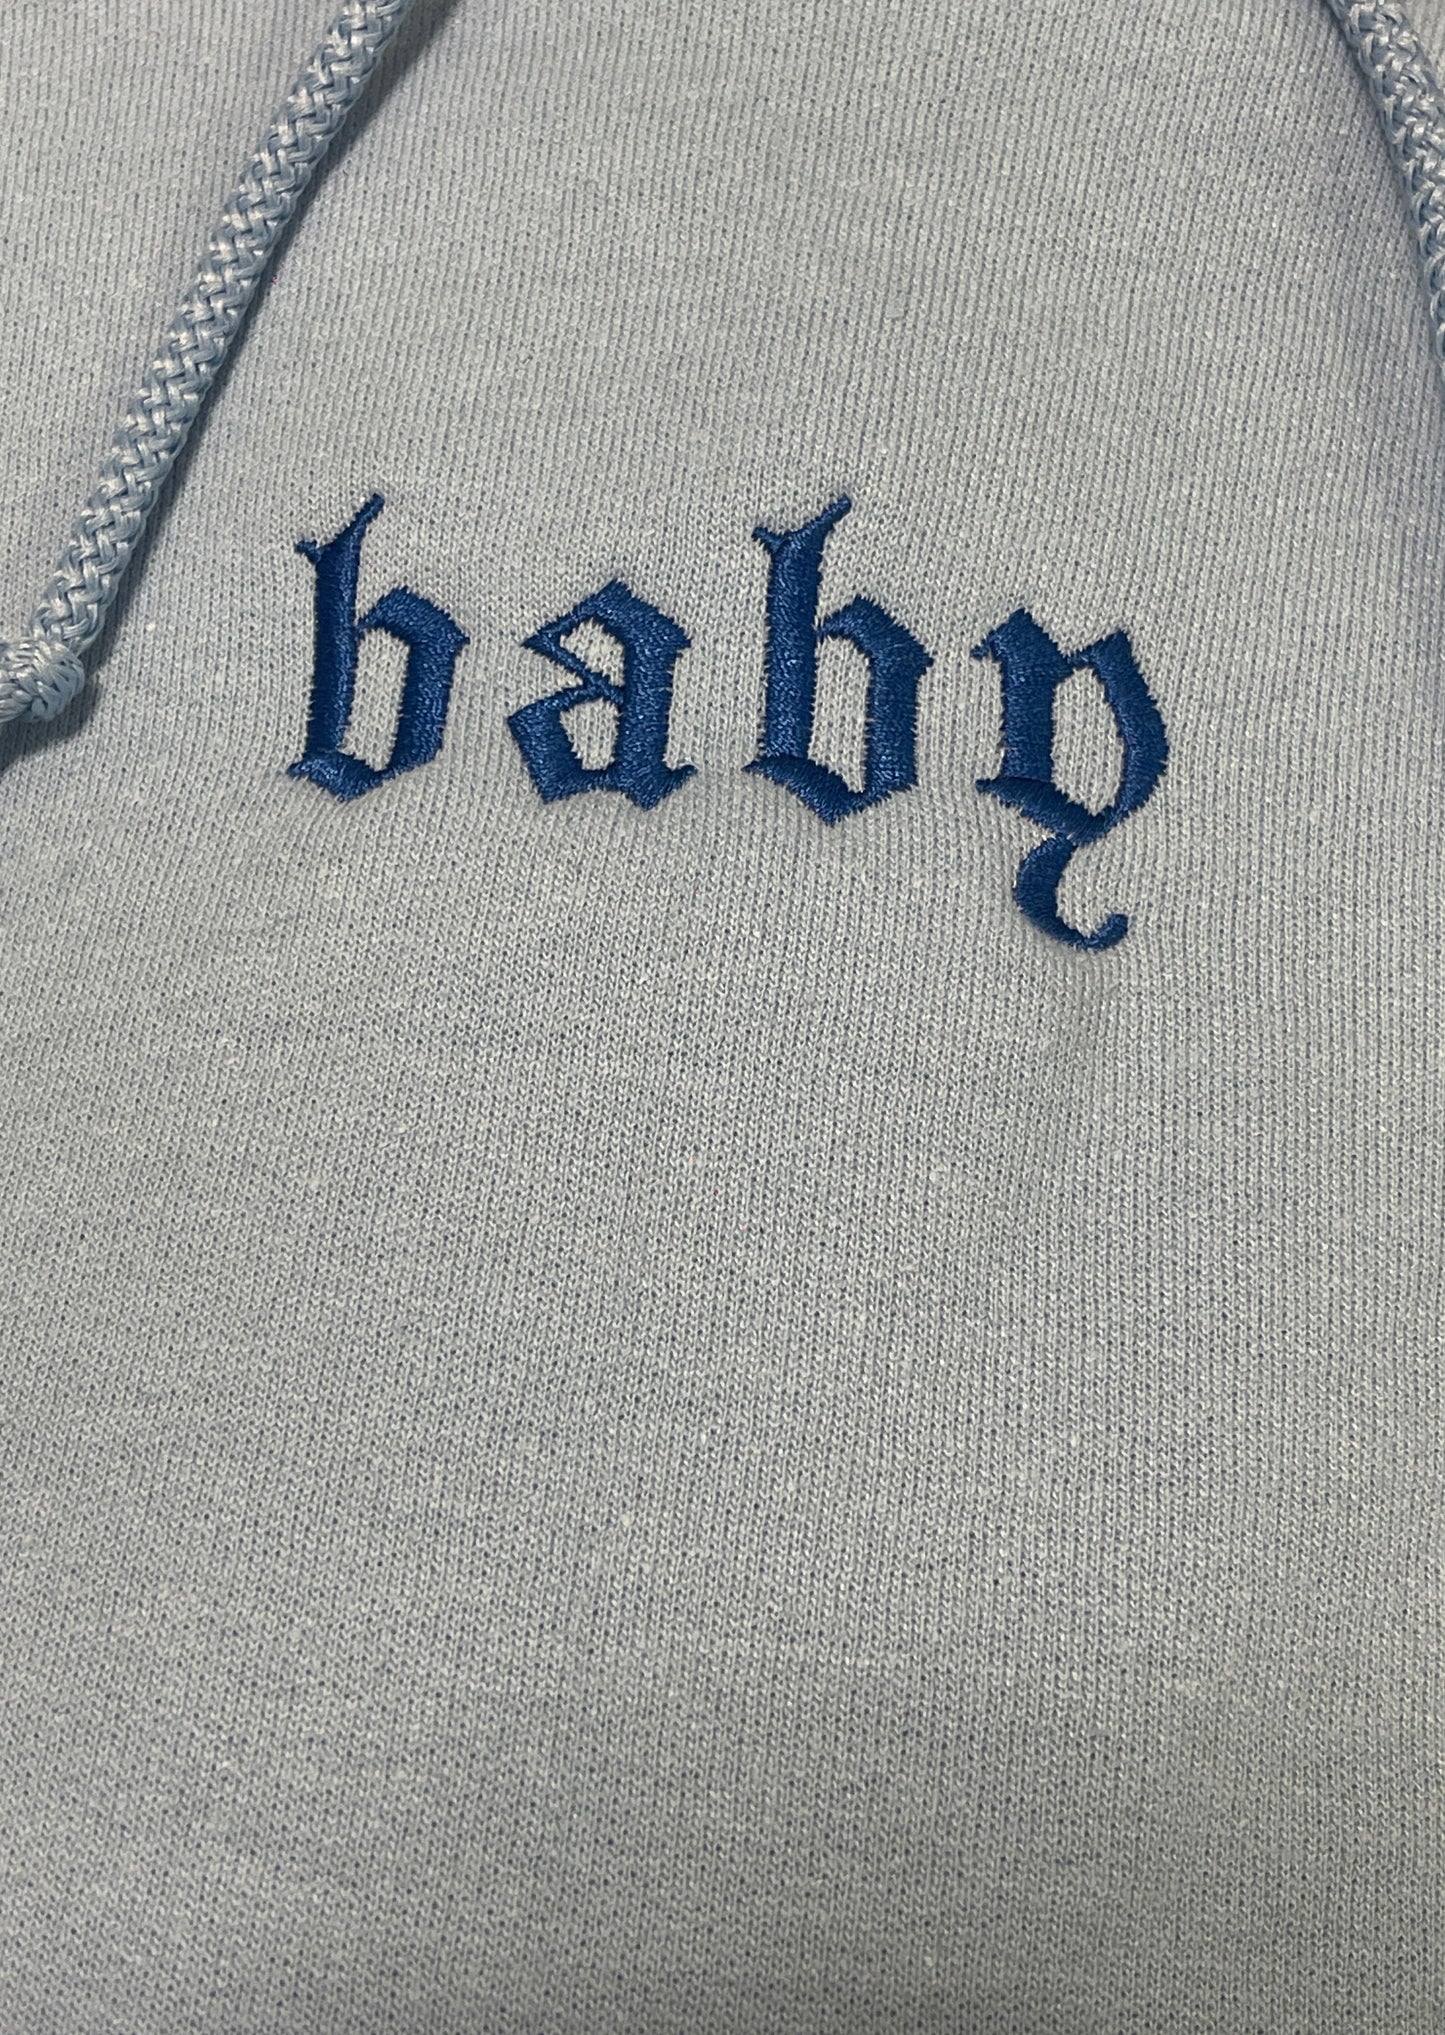 Baby Gothic Font Embroidery